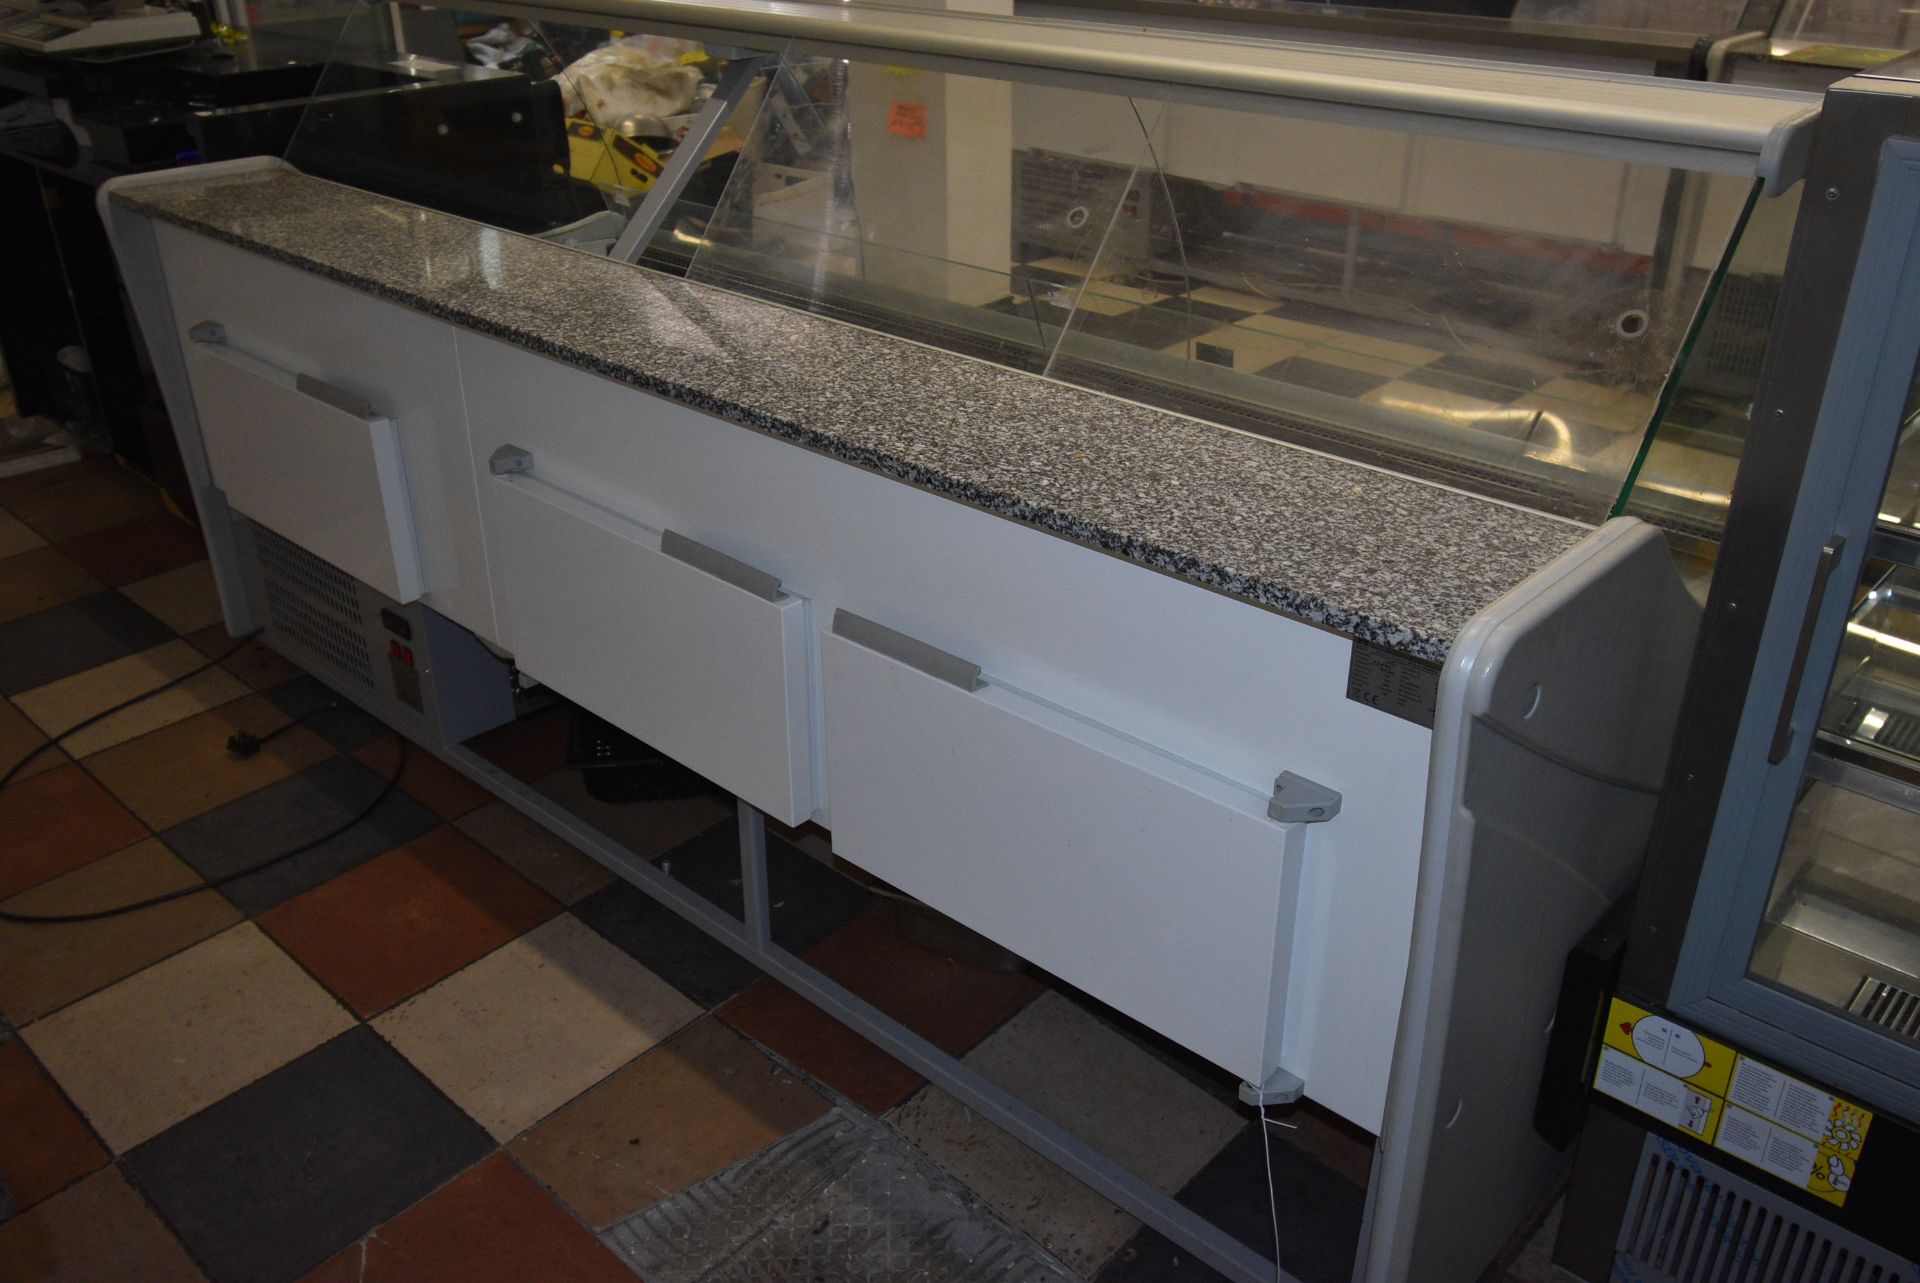 Bochnia Cebea Refrigerated Serve Over Display Counter Model WCH-16/1B WEGA, Year of Manufacture - Image 2 of 3